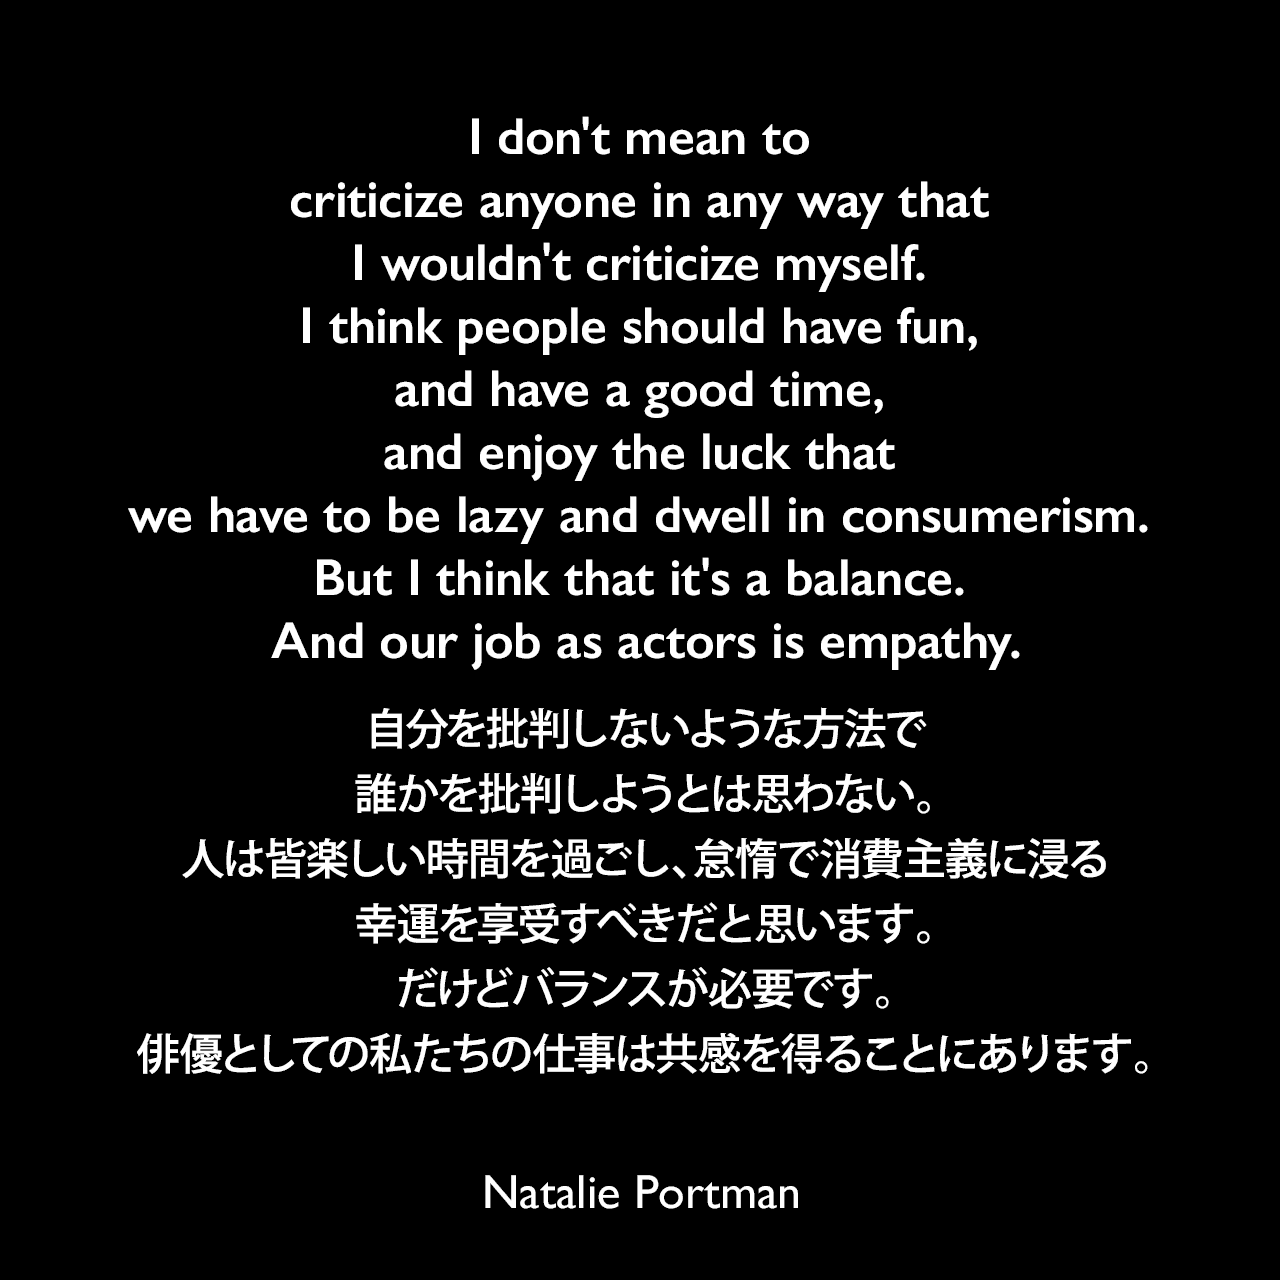 I don't mean to criticize anyone in any way that I wouldn't criticize myself. I think people should have fun, and have a good time, and enjoy the luck that we have to be lazy and dwell in consumerism. But I think that it's a balance. And our job as actors is empathy.自分を批判しないような方法で誰かを批判しようとは思わない。人は皆楽しい時間を過ごし、怠惰で消費主義に浸る幸運を享受すべきだと思います。だけどバランスが必要です。俳優としての私たちの仕事は共感を得ることにあります。Natalie Portman